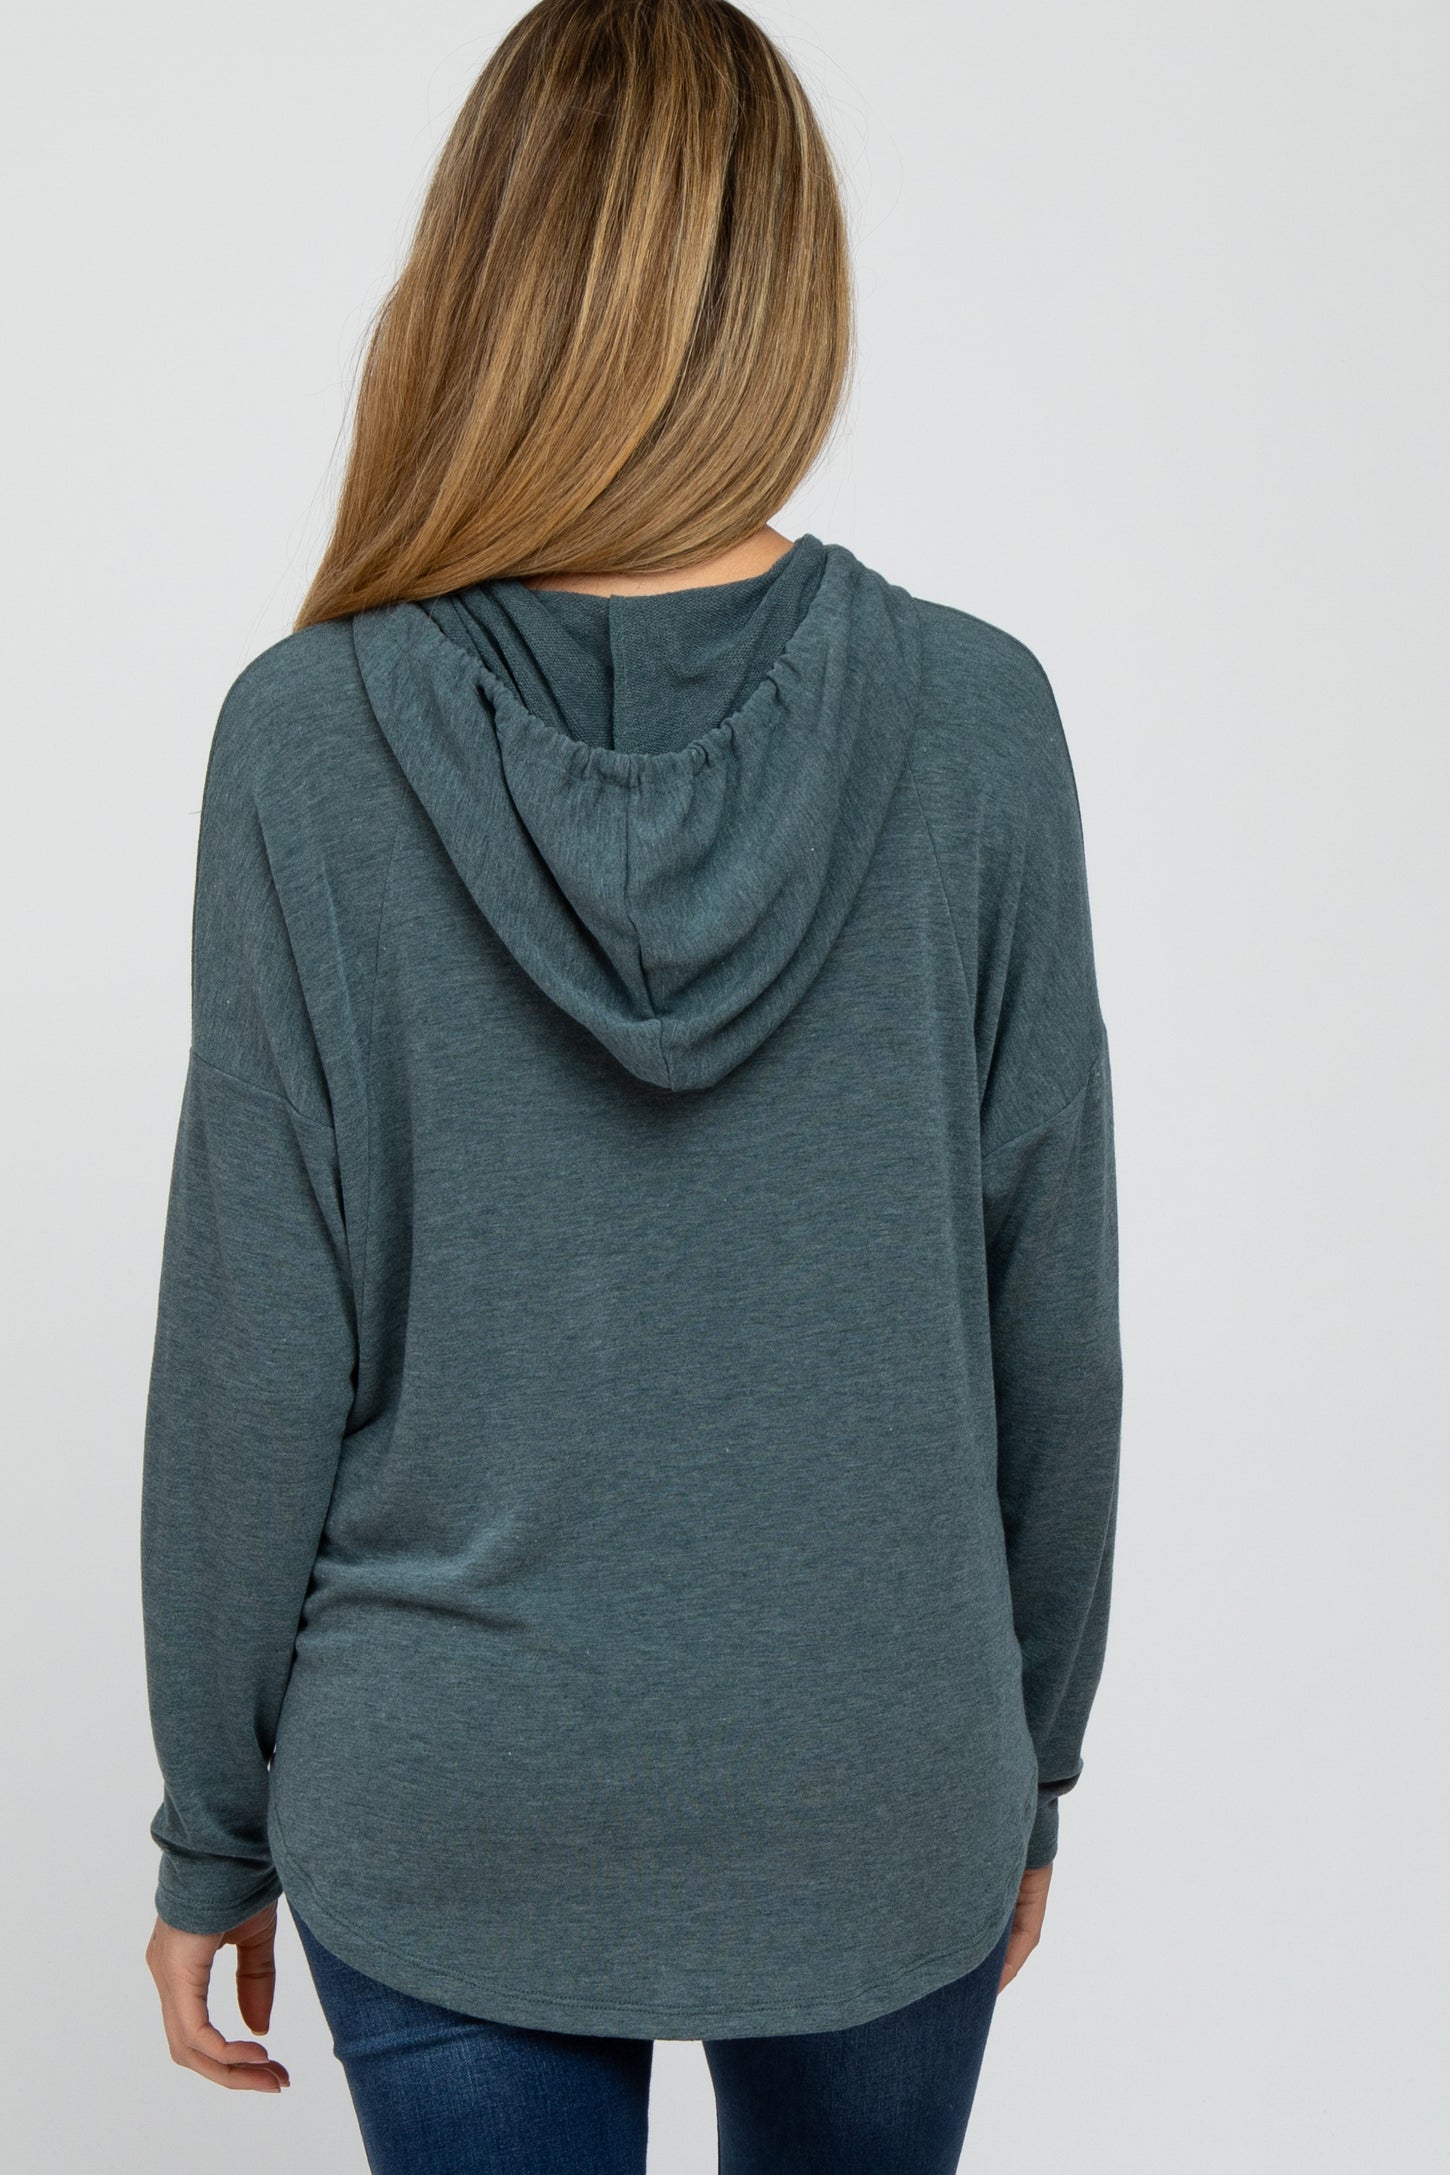 Forest Green Front Pocket Maternity Hooded Long Sleeve Top